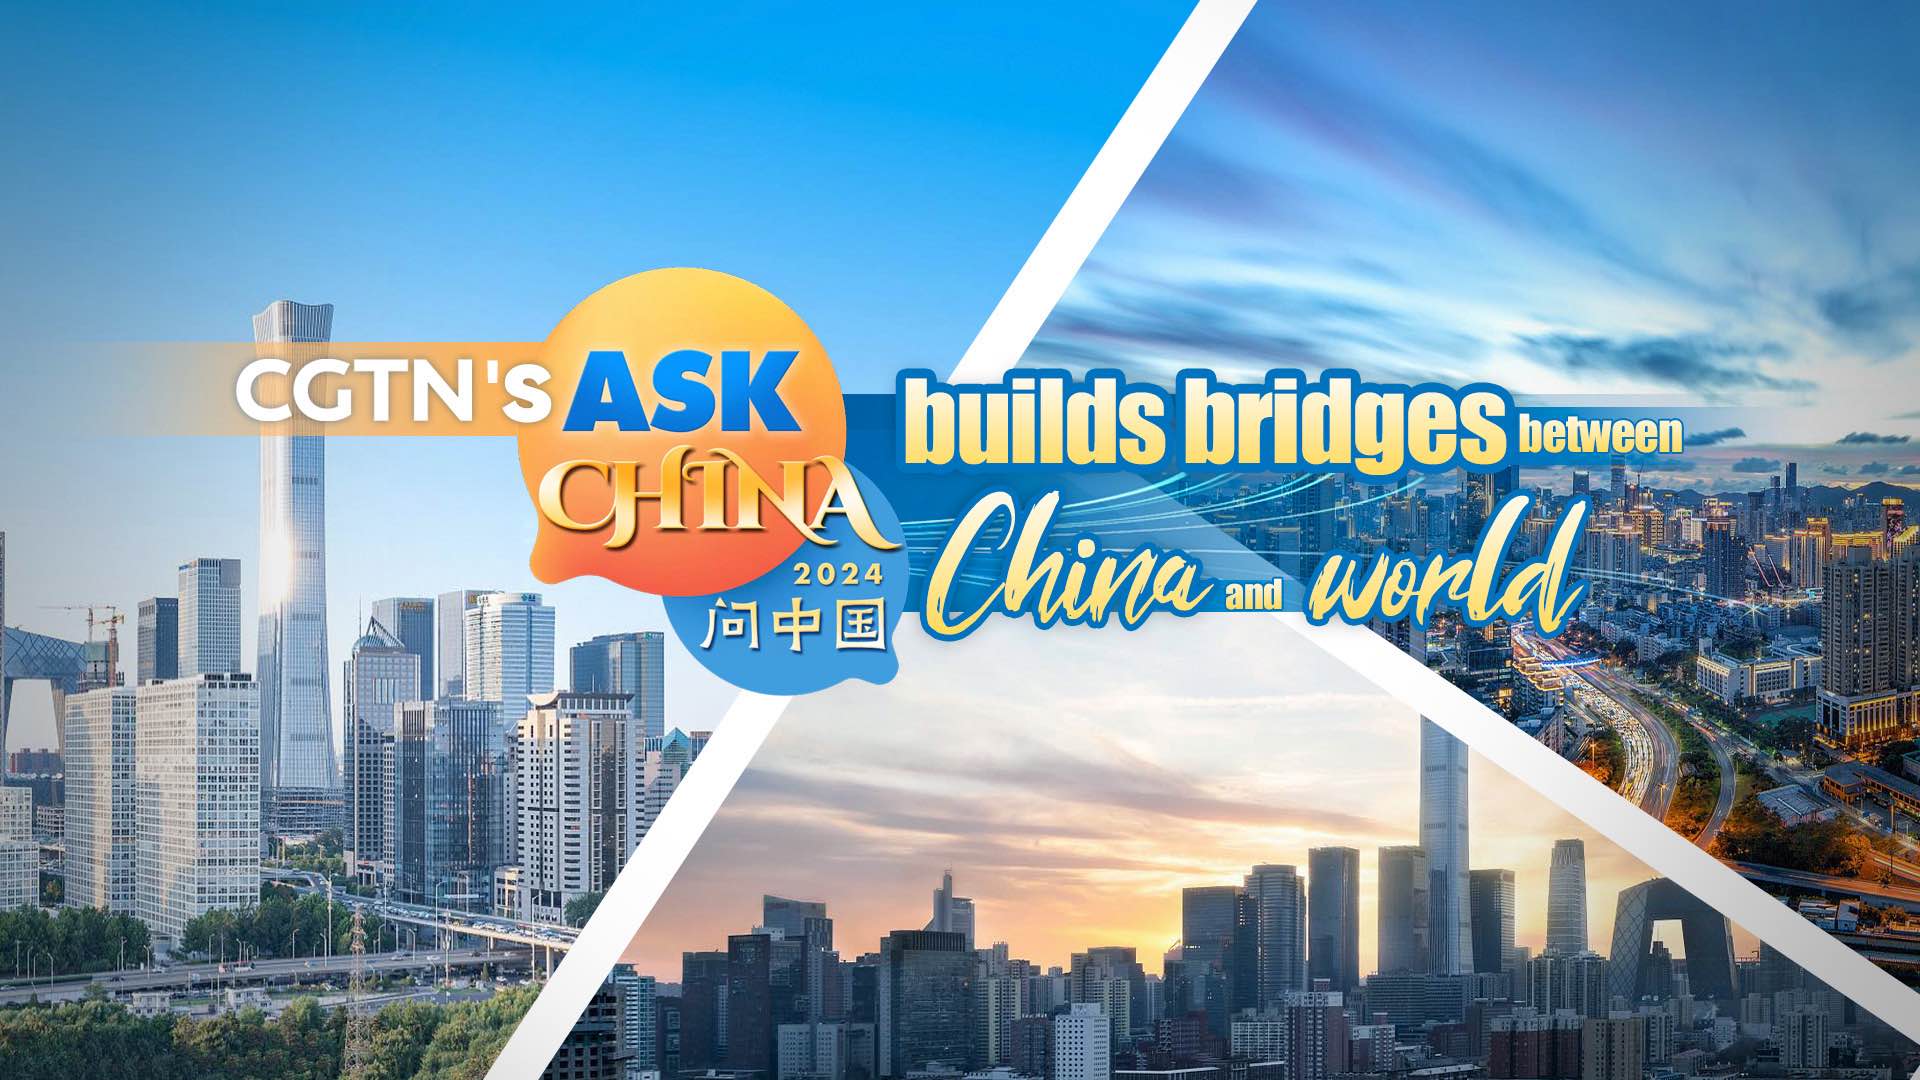 How CGTN's 'Ask China 2024' campaign helps the world understand China